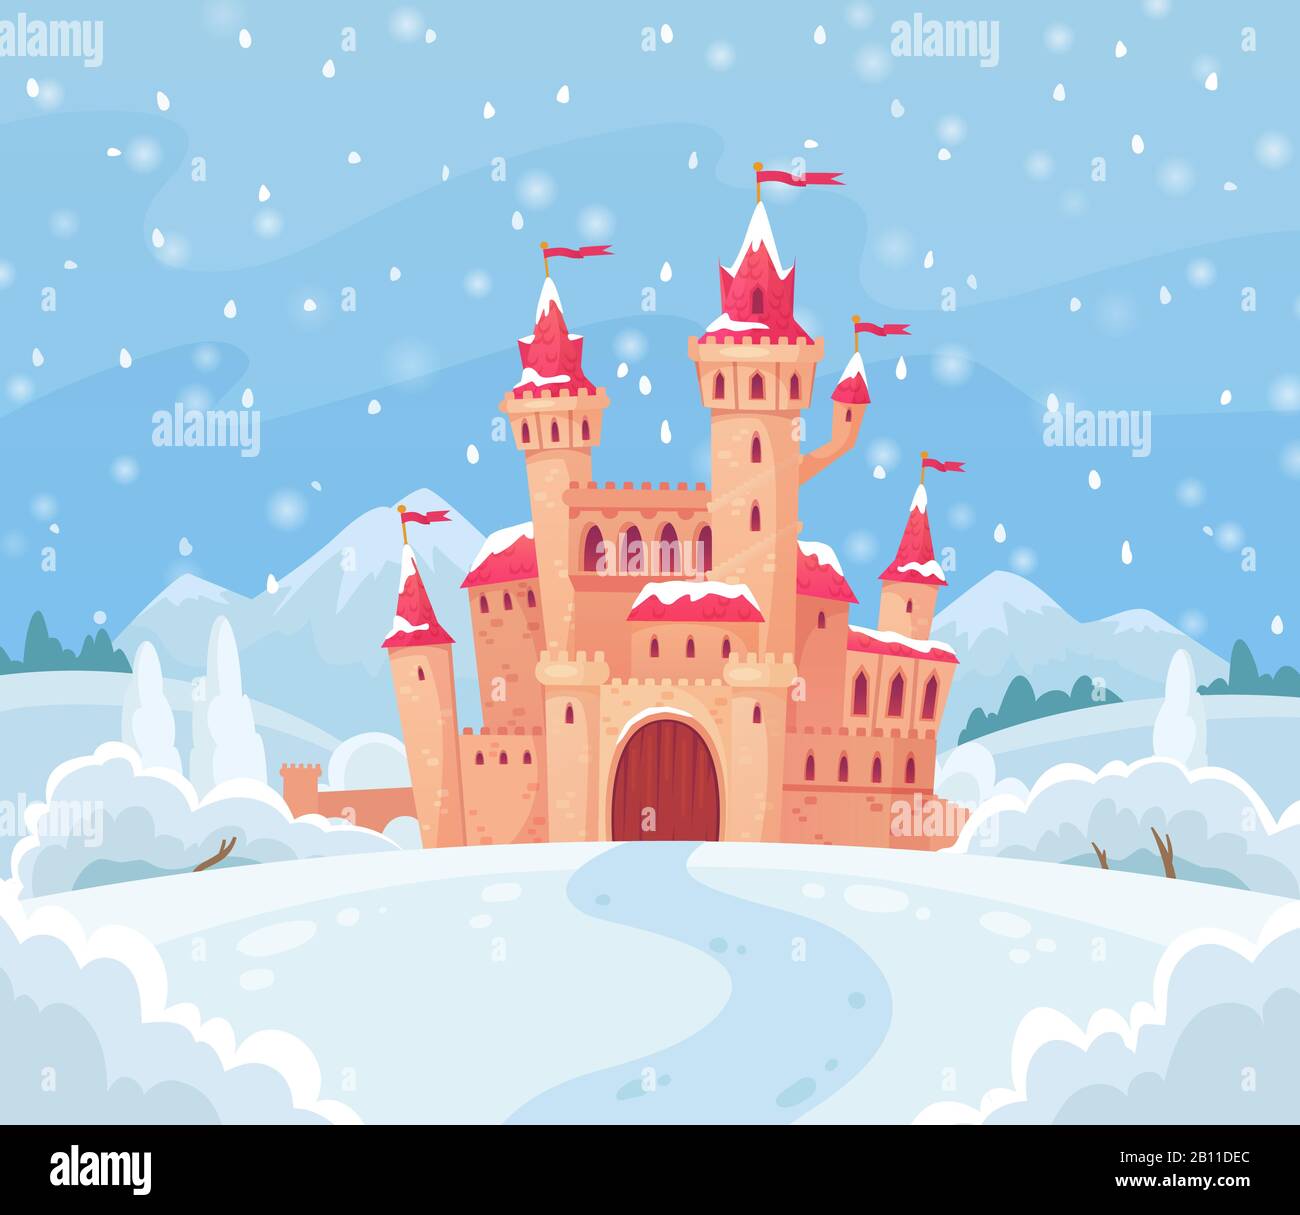 Fairy tales winter castle. Magical snowy landscape with medieval castle cartoon vector background illustration Stock Vector